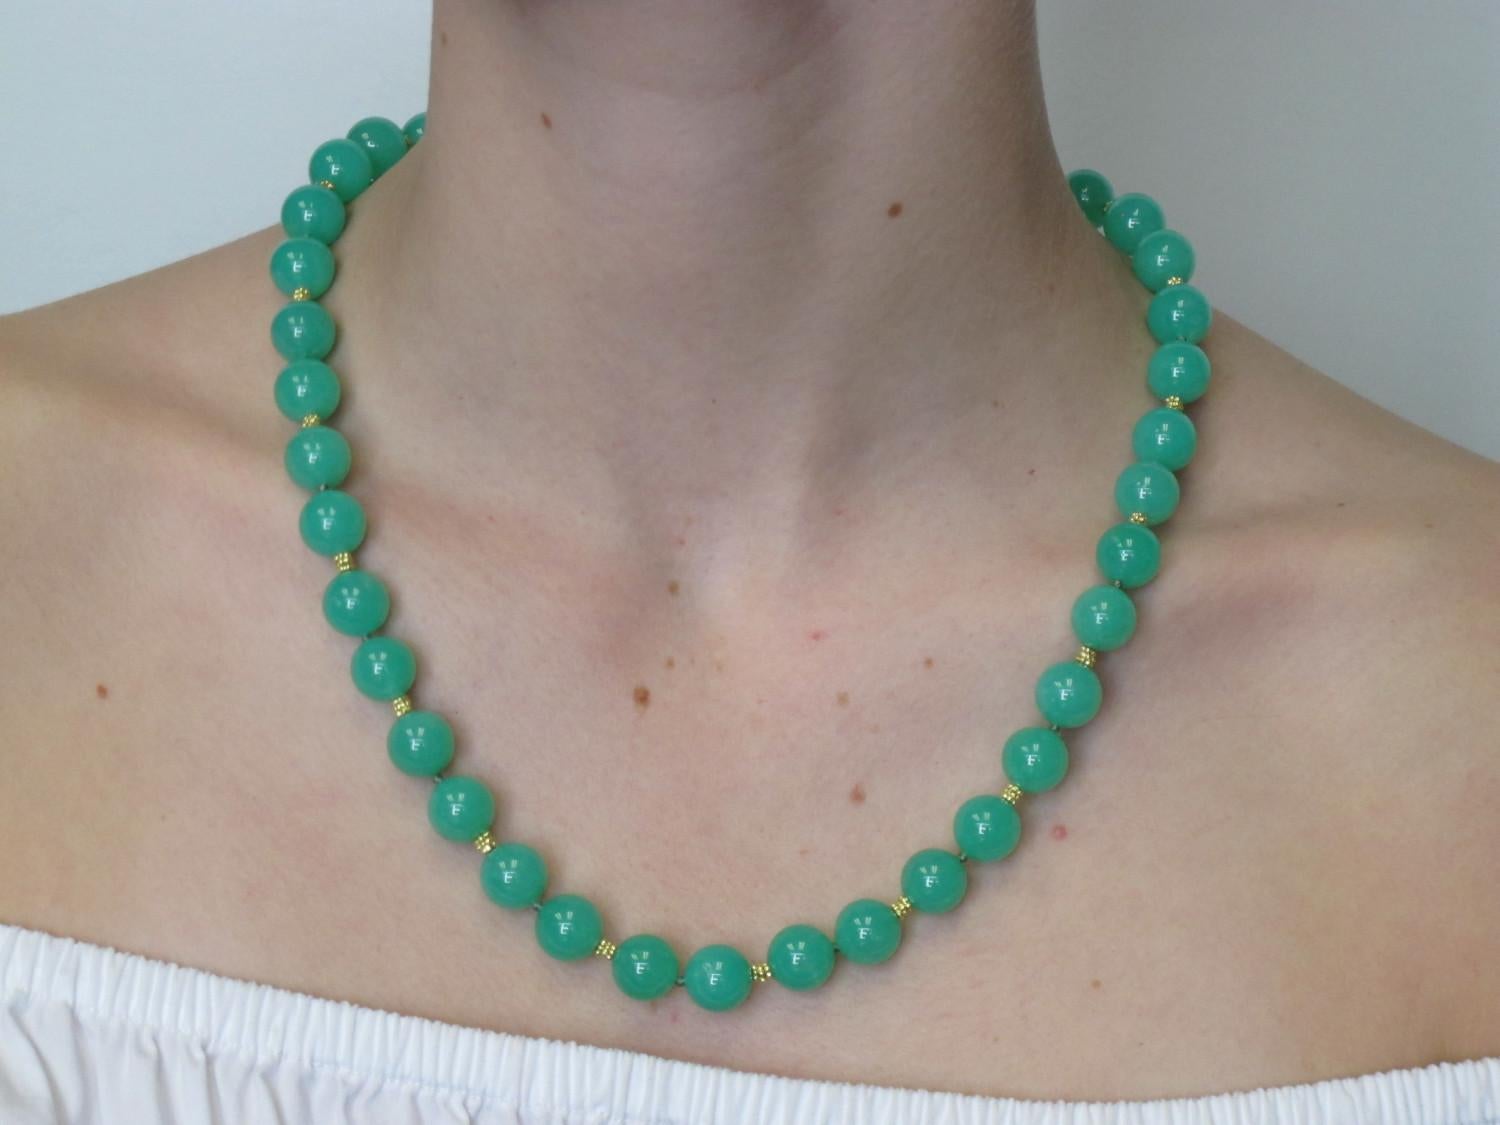 Artisan 11mm Chrysoprase Bead Strand Necklace with Yellow Gold Bead Accents, 21 inches